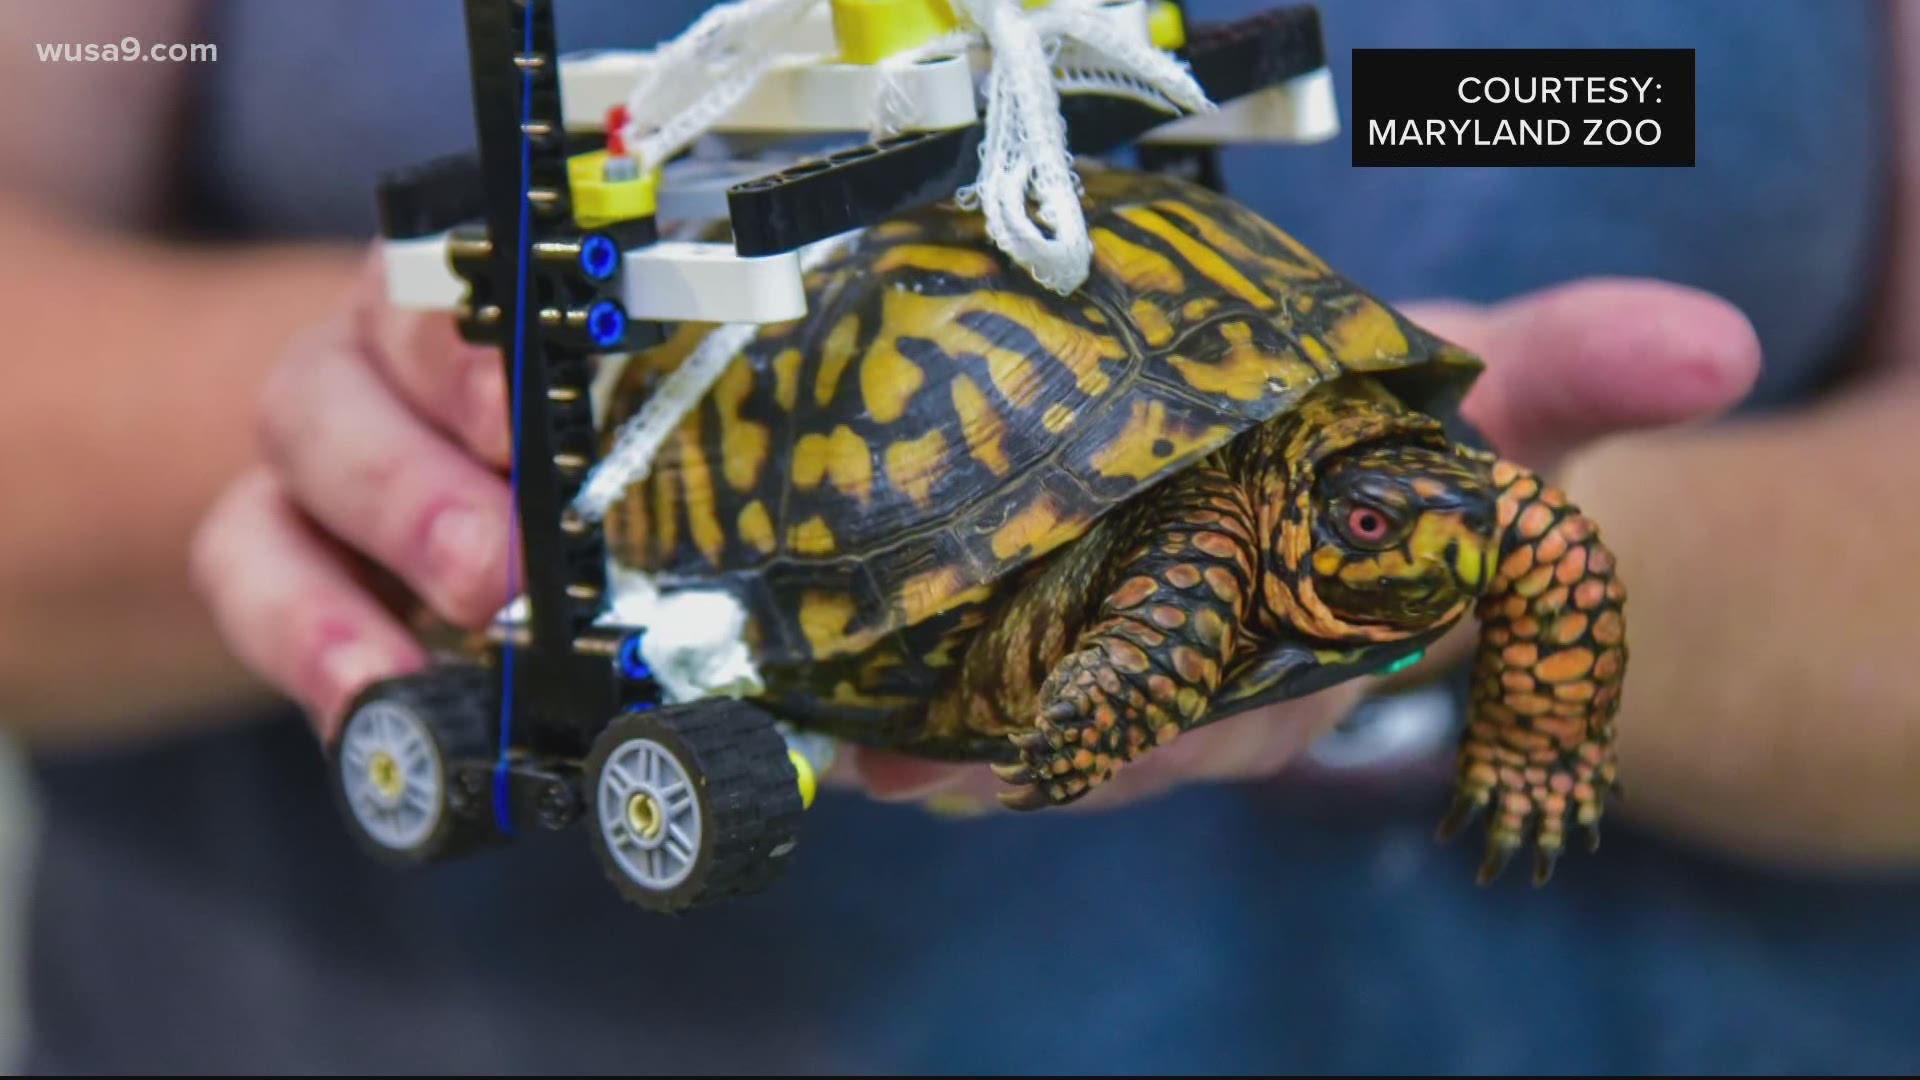 The injured turtle was found in Druid Hill back in July 2018. Now it's one of a kind wheels are giving him a second chance at life.